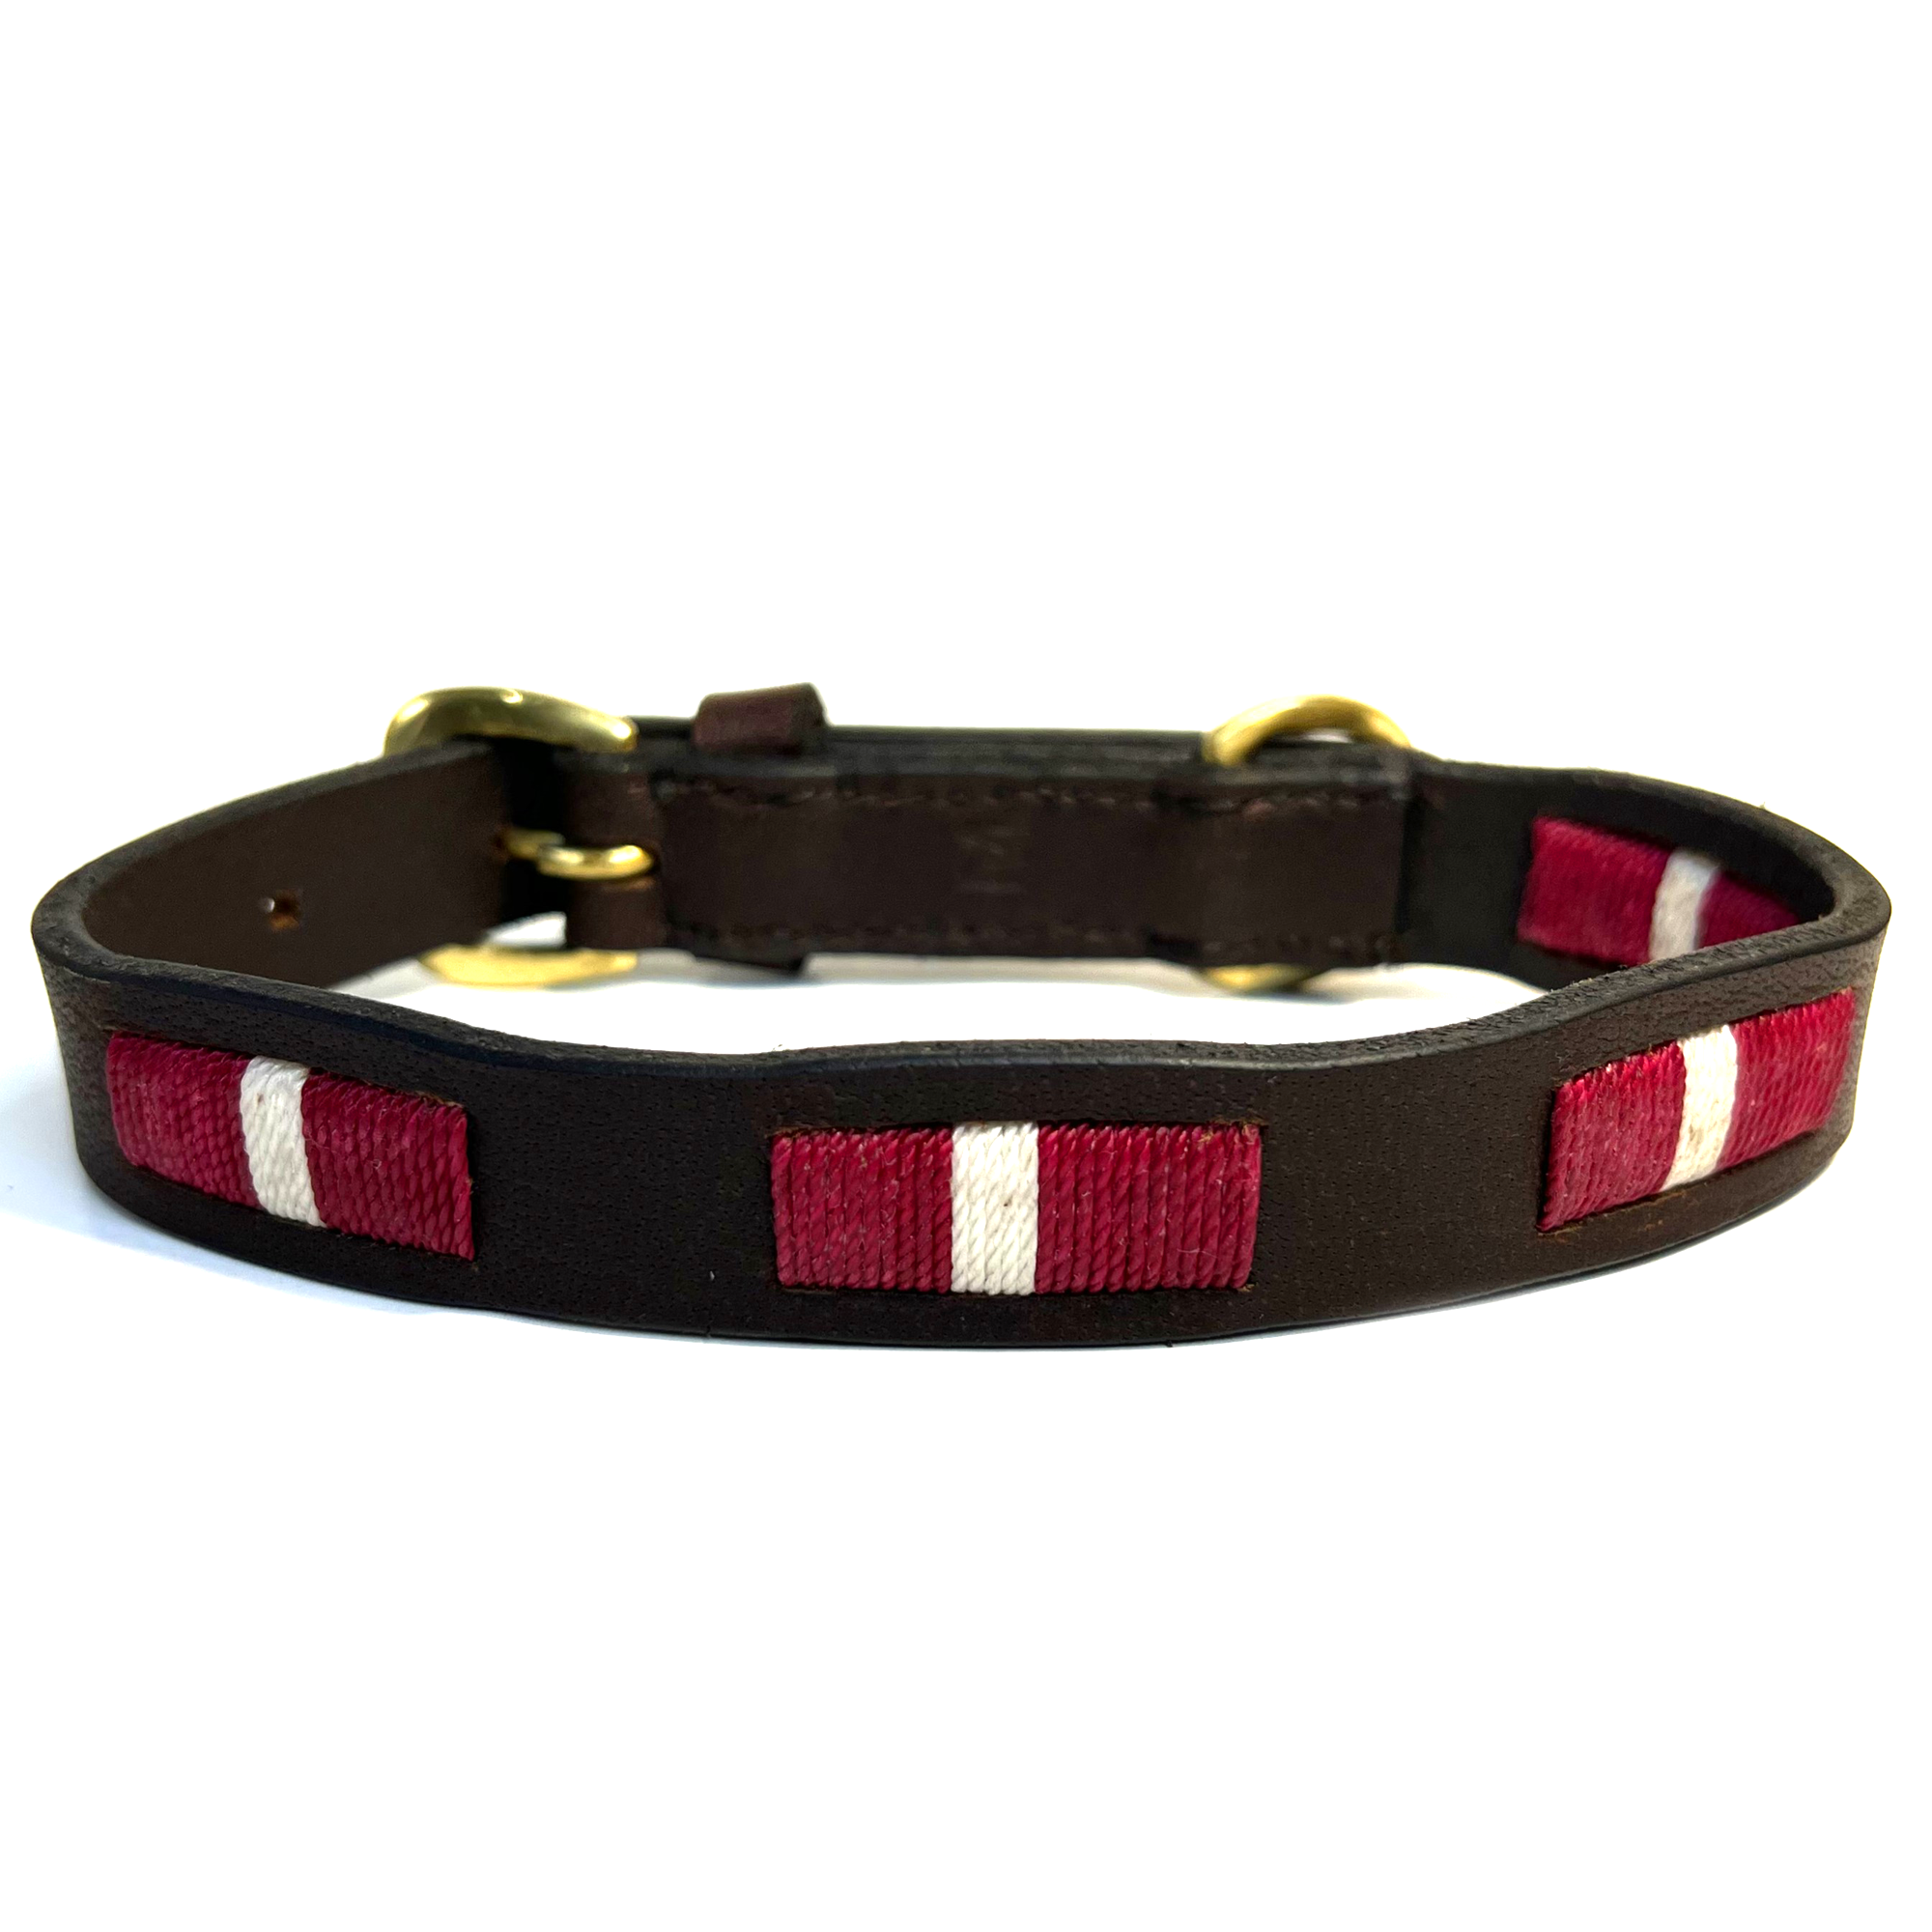 handmade natural leather dog collar, with decorative ruby red and white stitching.  Strong, sustainable and compostable brown waxed leather Buffalo Leather.Aged brass buckle